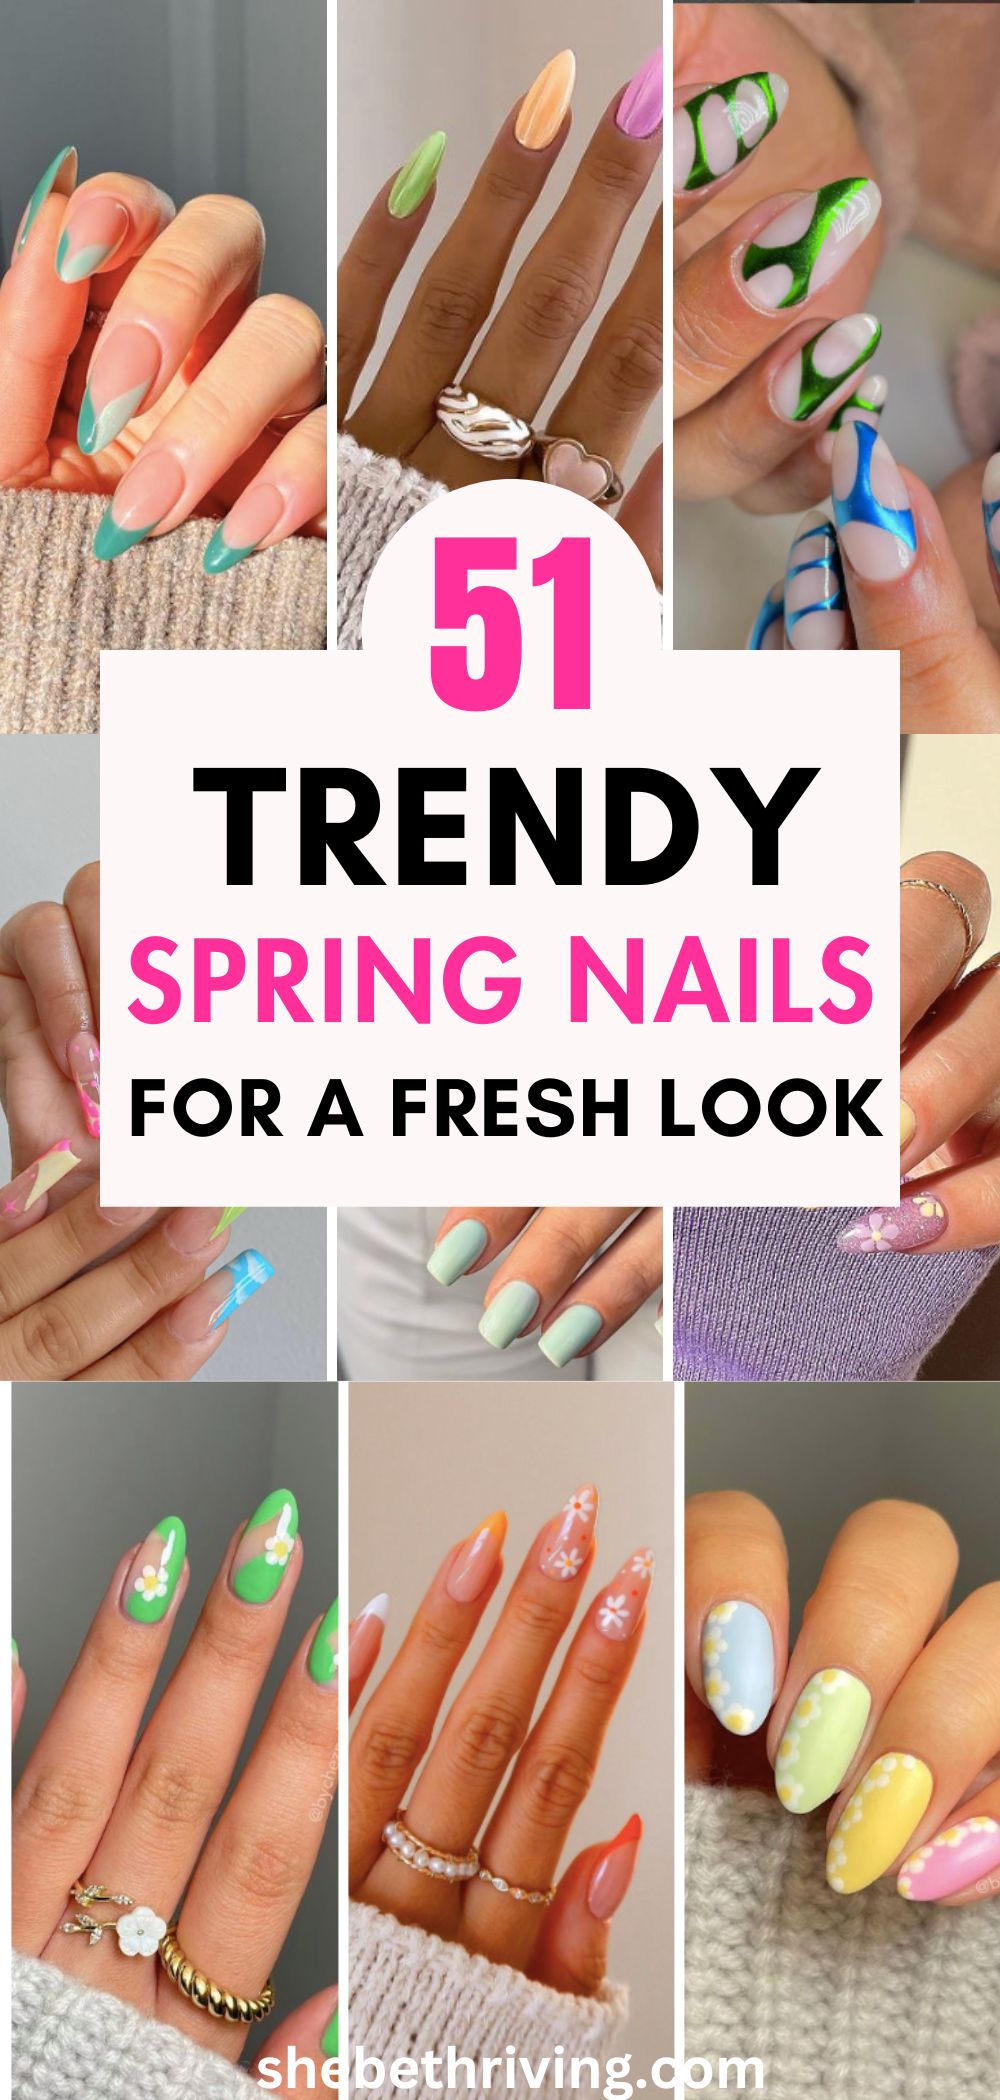 51 Insanely Cute Spring Nail Designs To Freshen Up Your Look - She Be ...